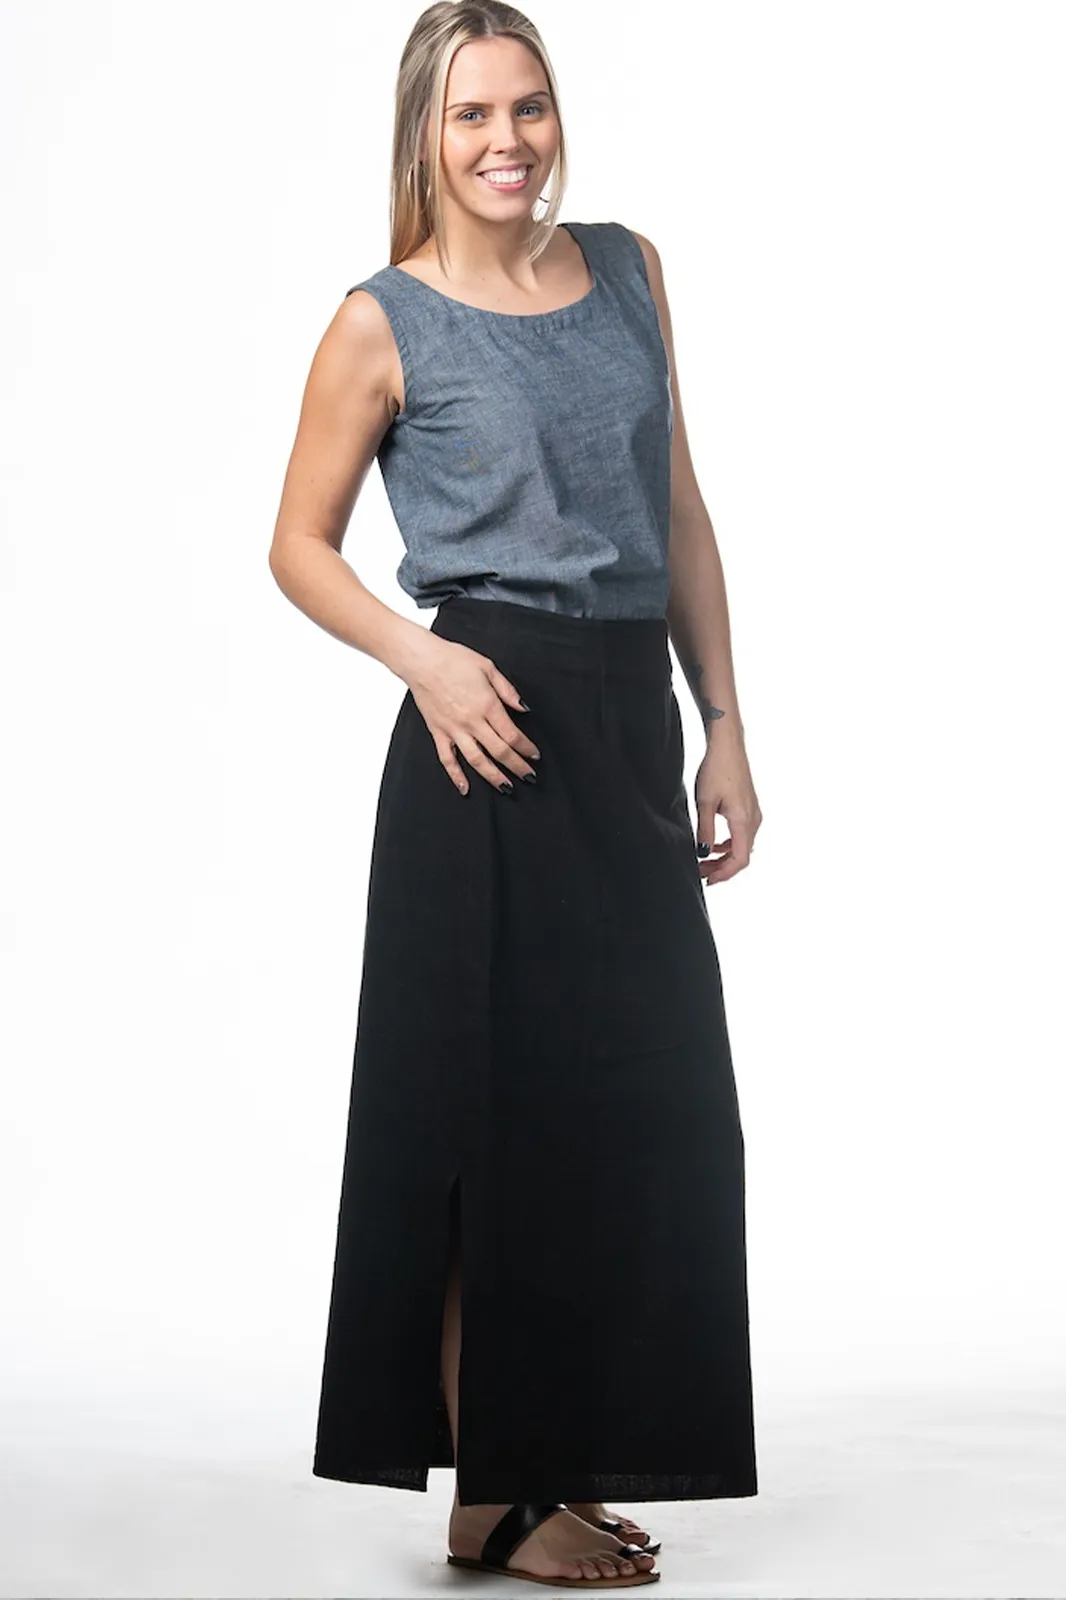 Swahlee wrap skirt, black skirts, casual wear for office, long black skirts, cotton skirts for women, casual long skirts for women, skirts for women, sepia stories, handmade wrap skirt, cotton skirt, sustainable fashion, handmade clothes for women, women’s clothing, clothing for her, swahlee wrap skirt, black skirts, casual wear for office, black skirt outfit